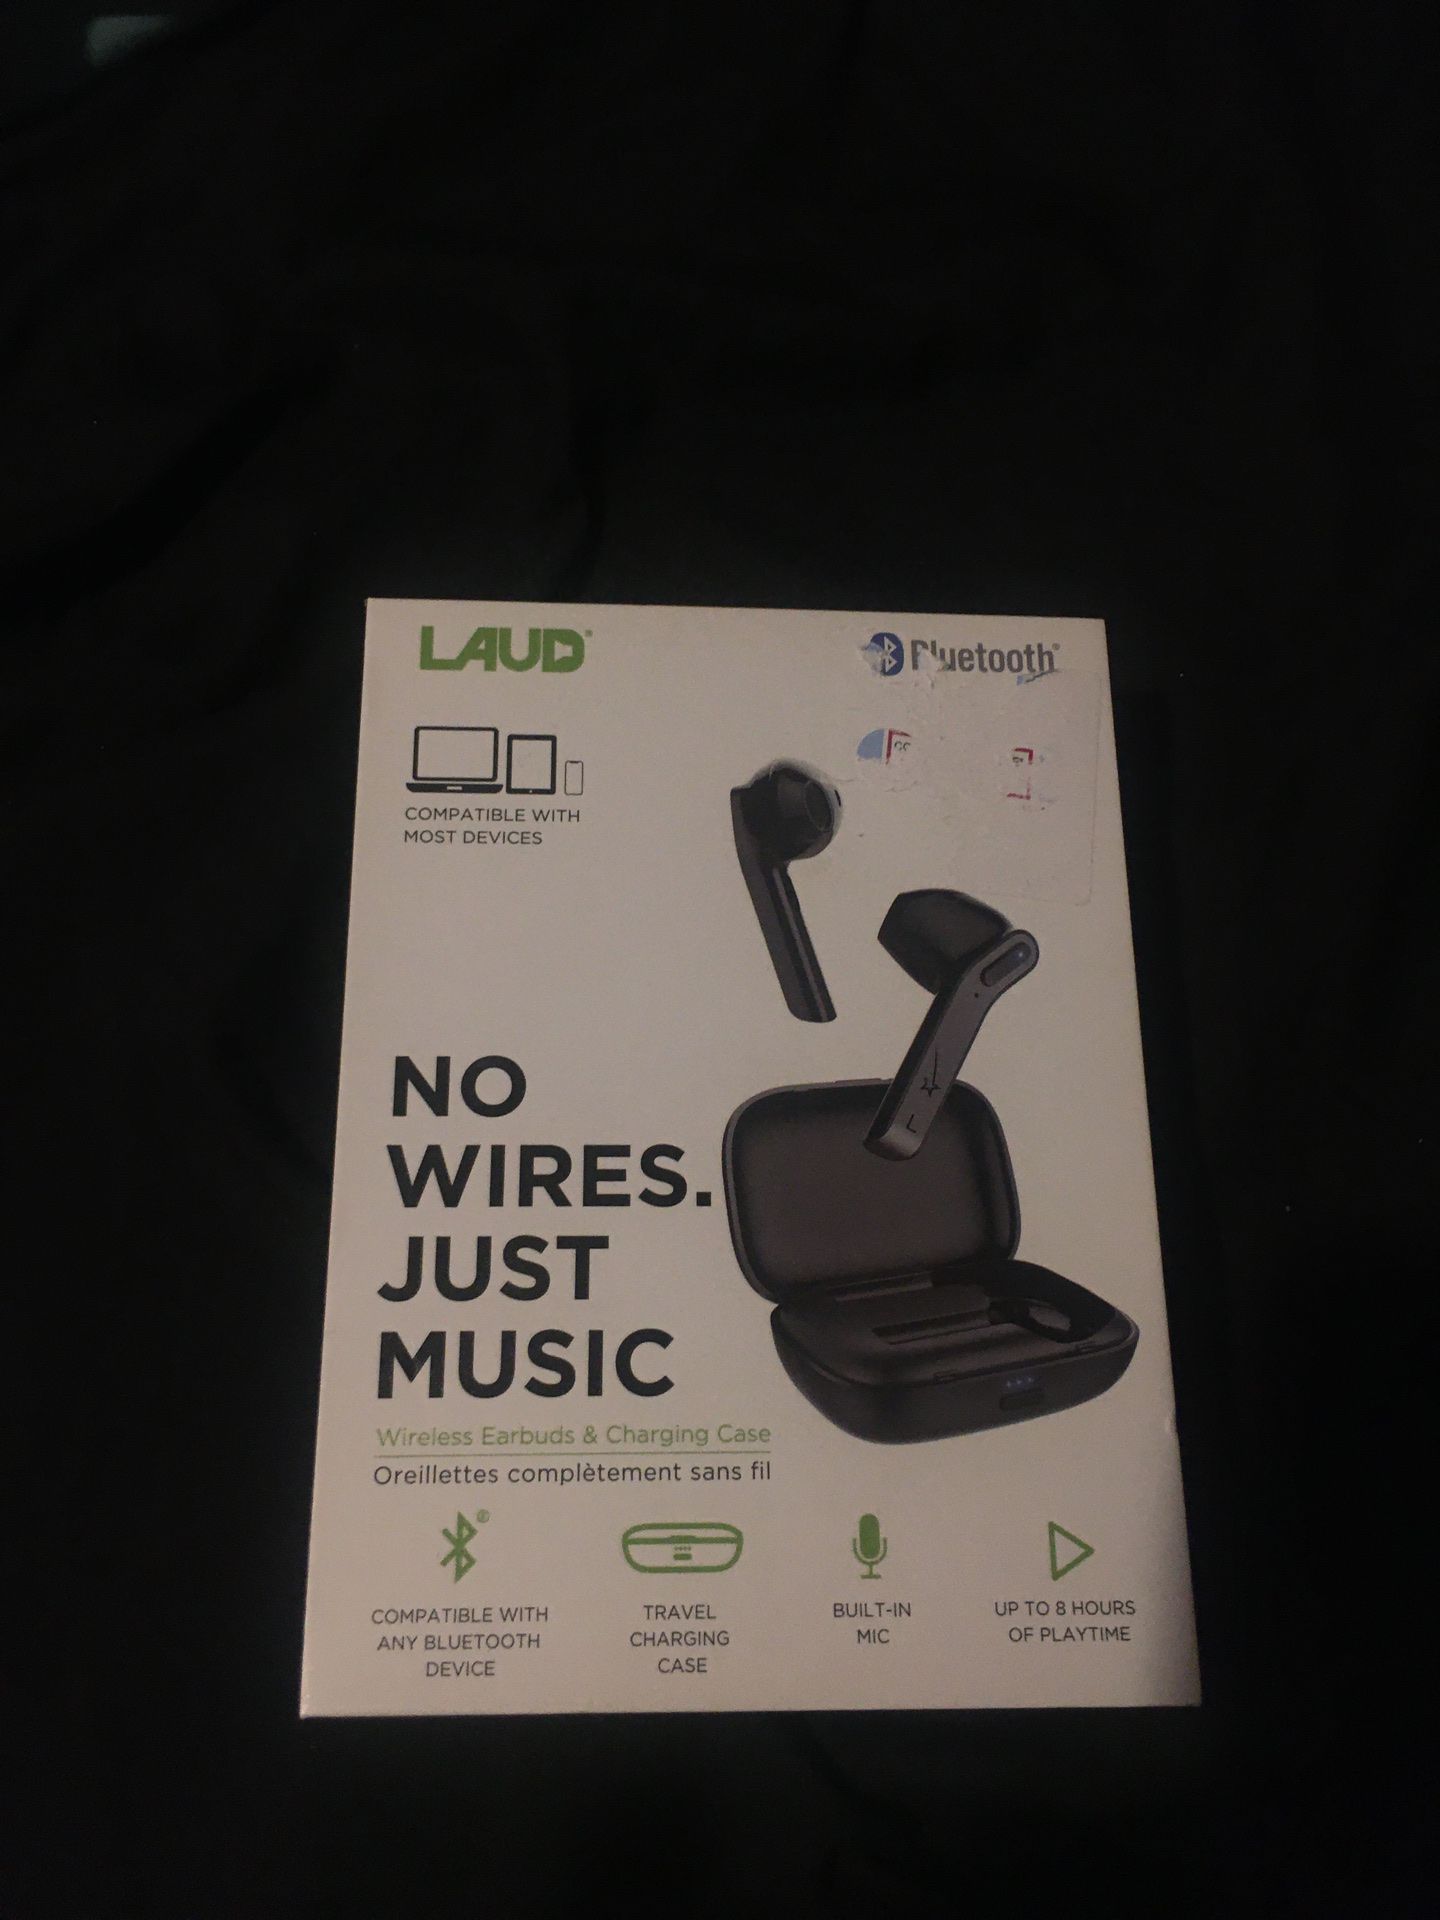 Wireless headphones laud w/charger and holding box